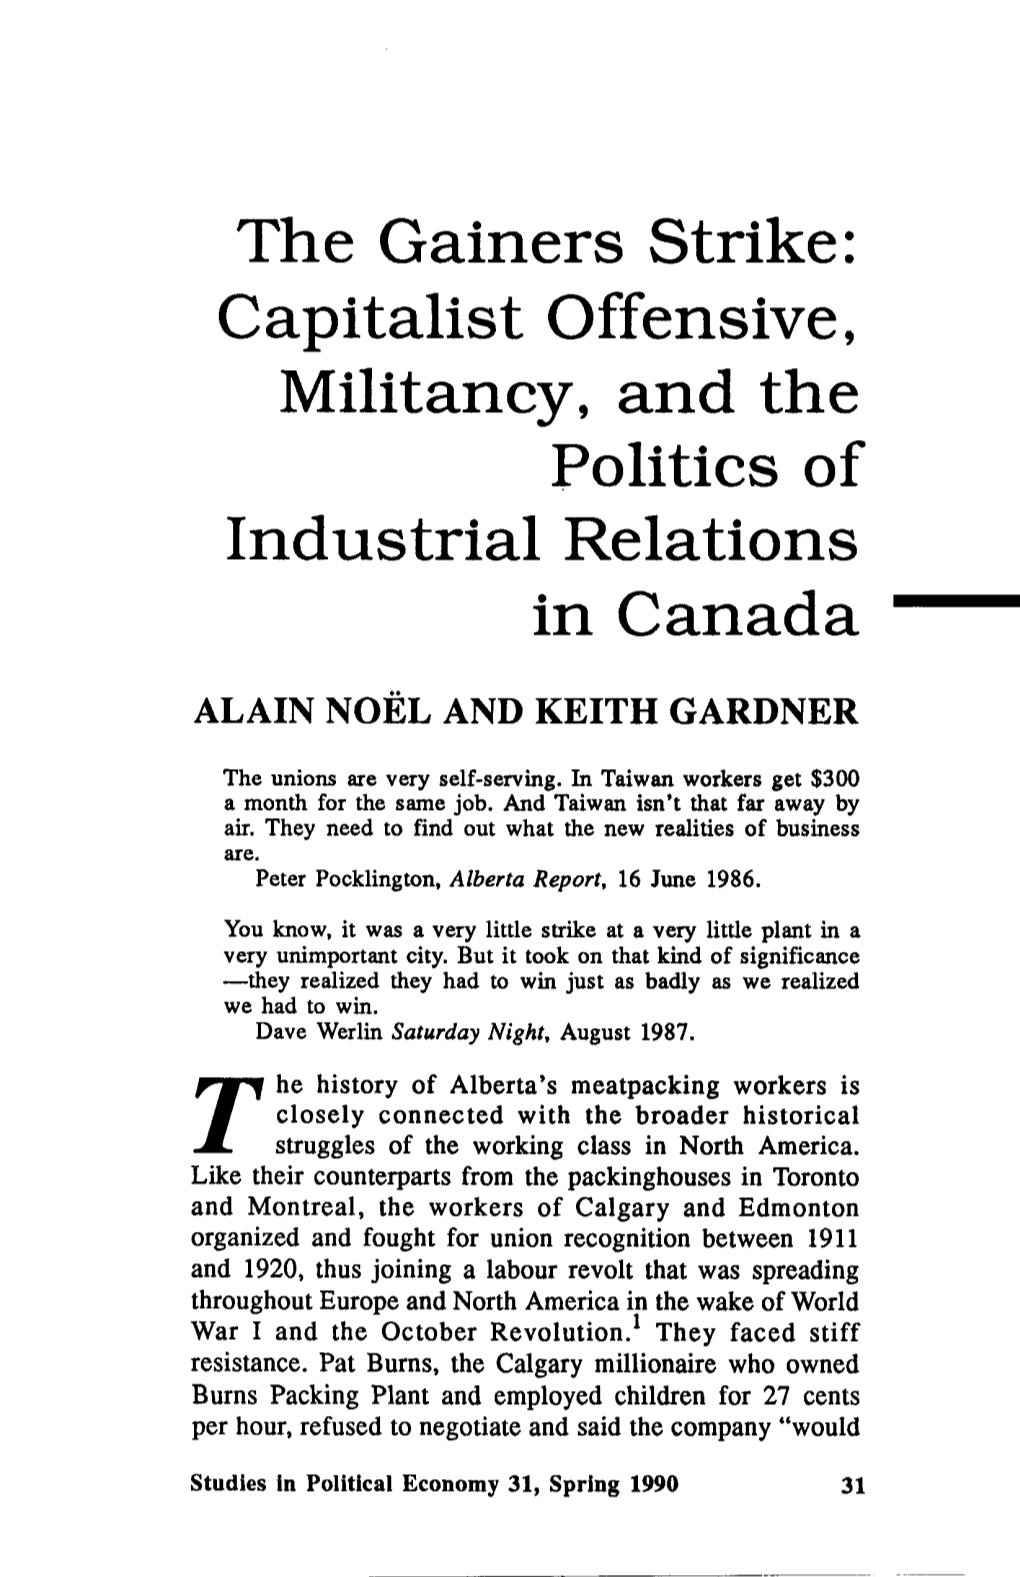 The Gainers Strike: Capitalist Offensive, Militancy, and the Politics of Industrial Relations in Canada